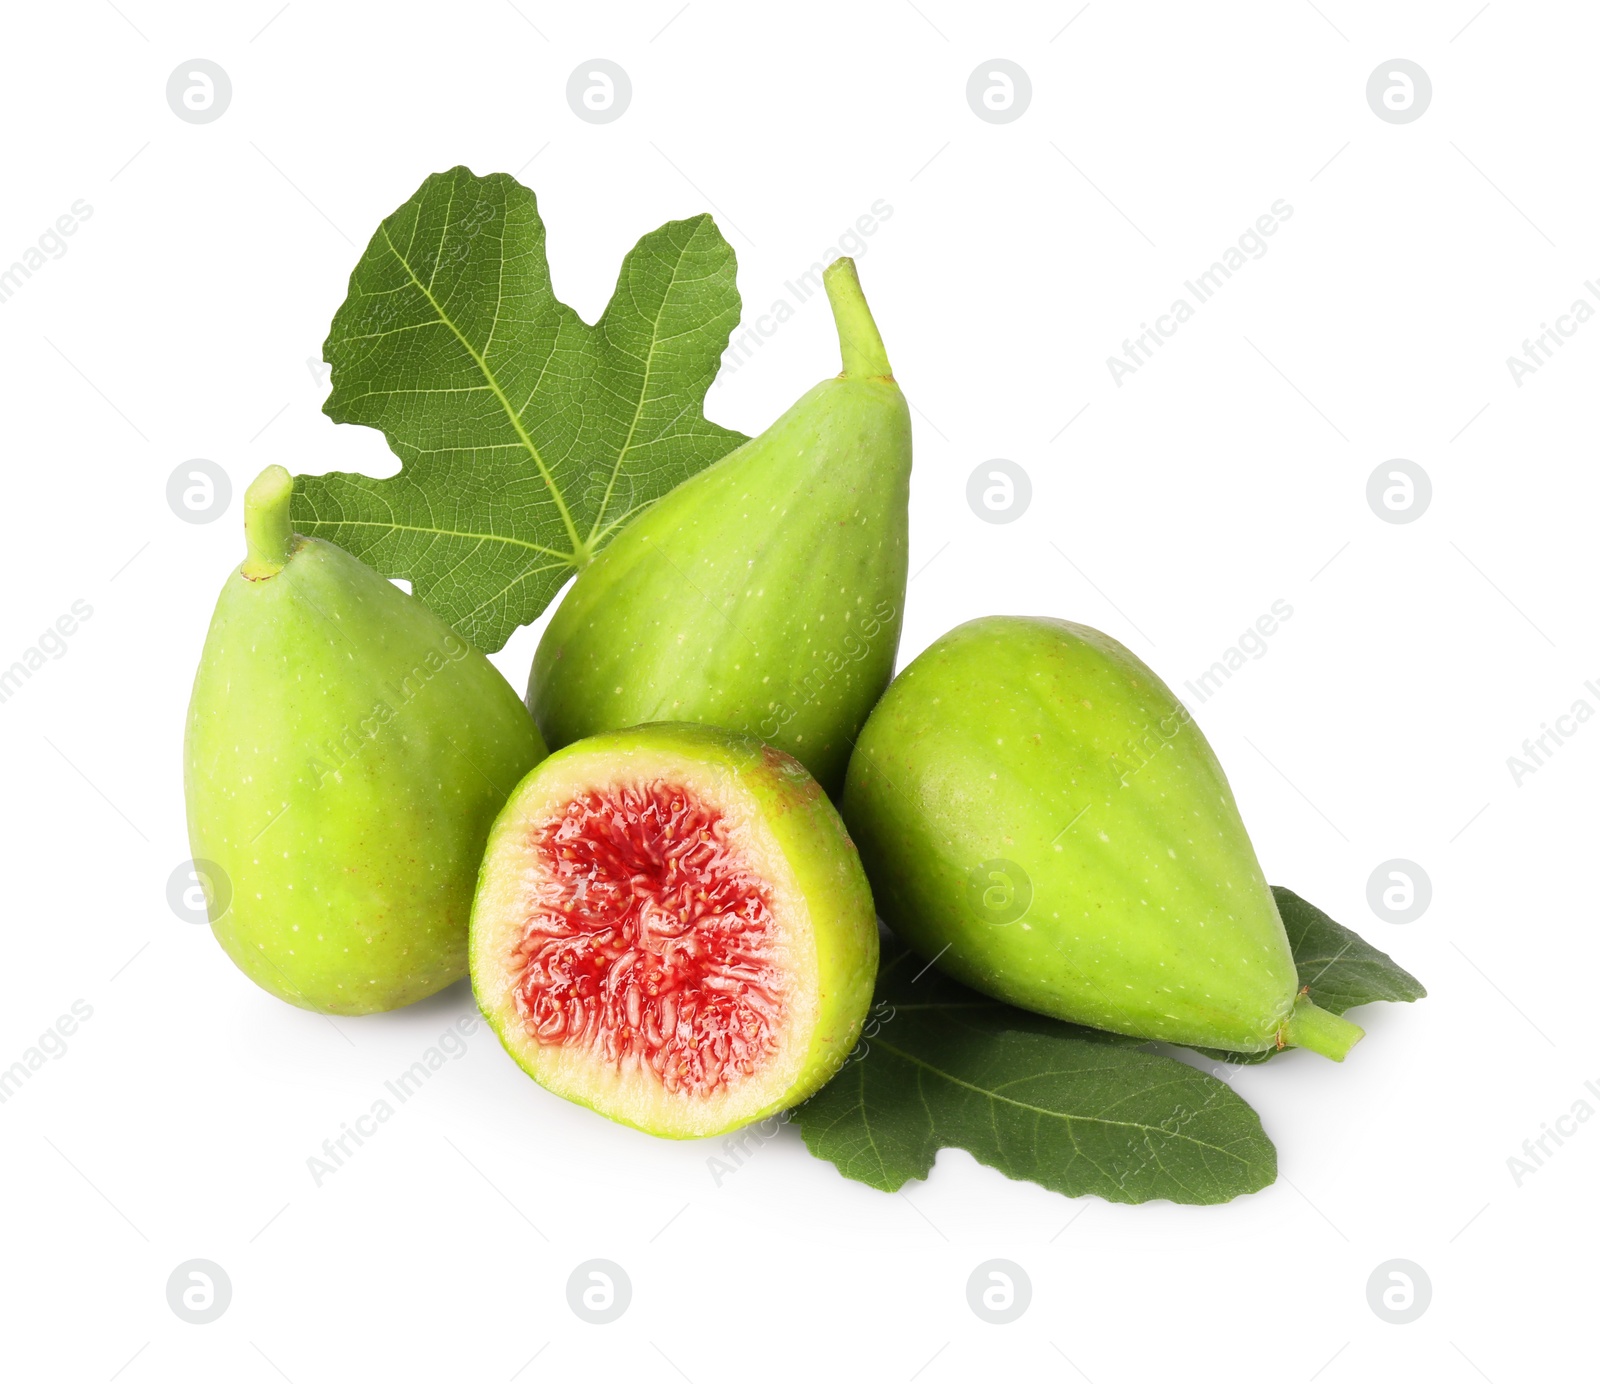 Photo of Cut and whole green figs with leaves isolated on white